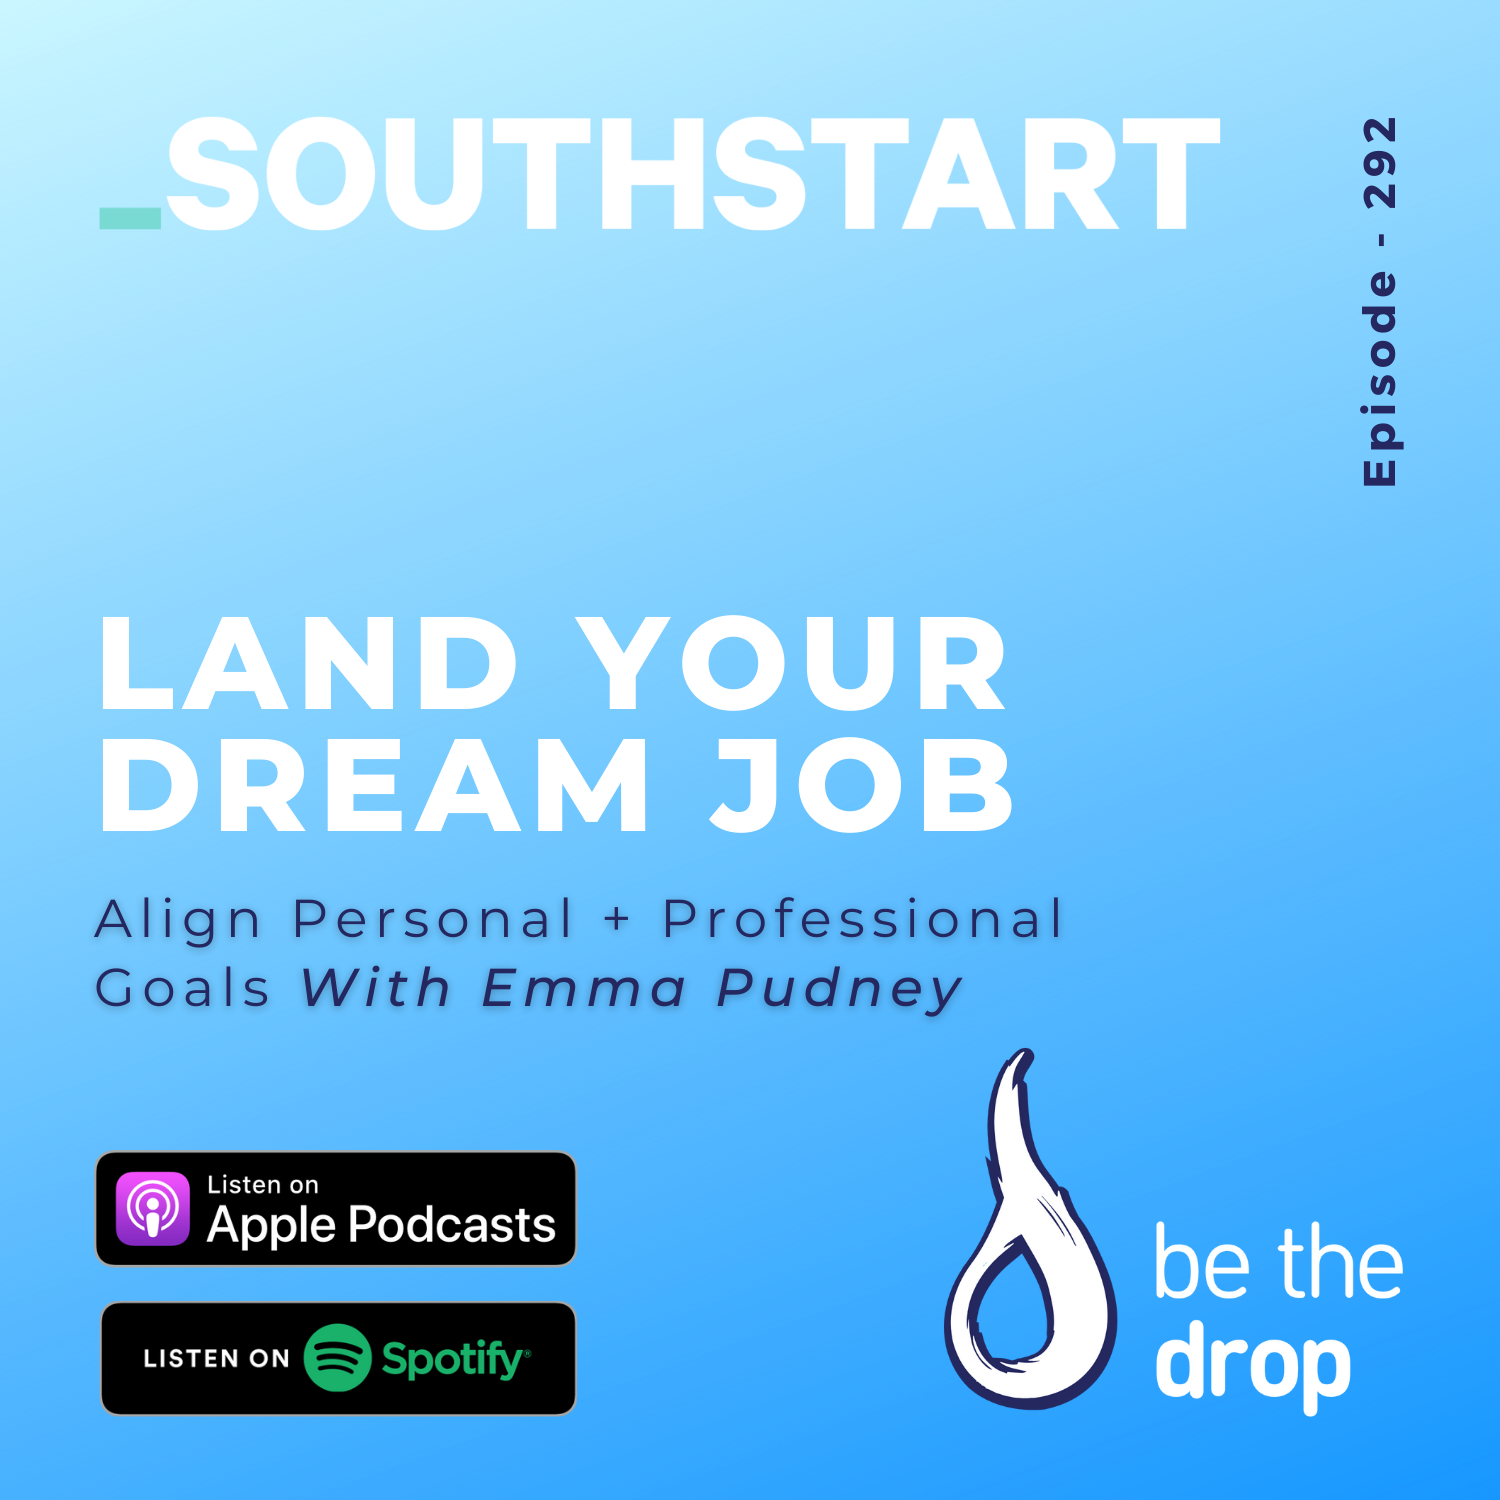 Your Dream Job: Align Your Personal + Professional Goals